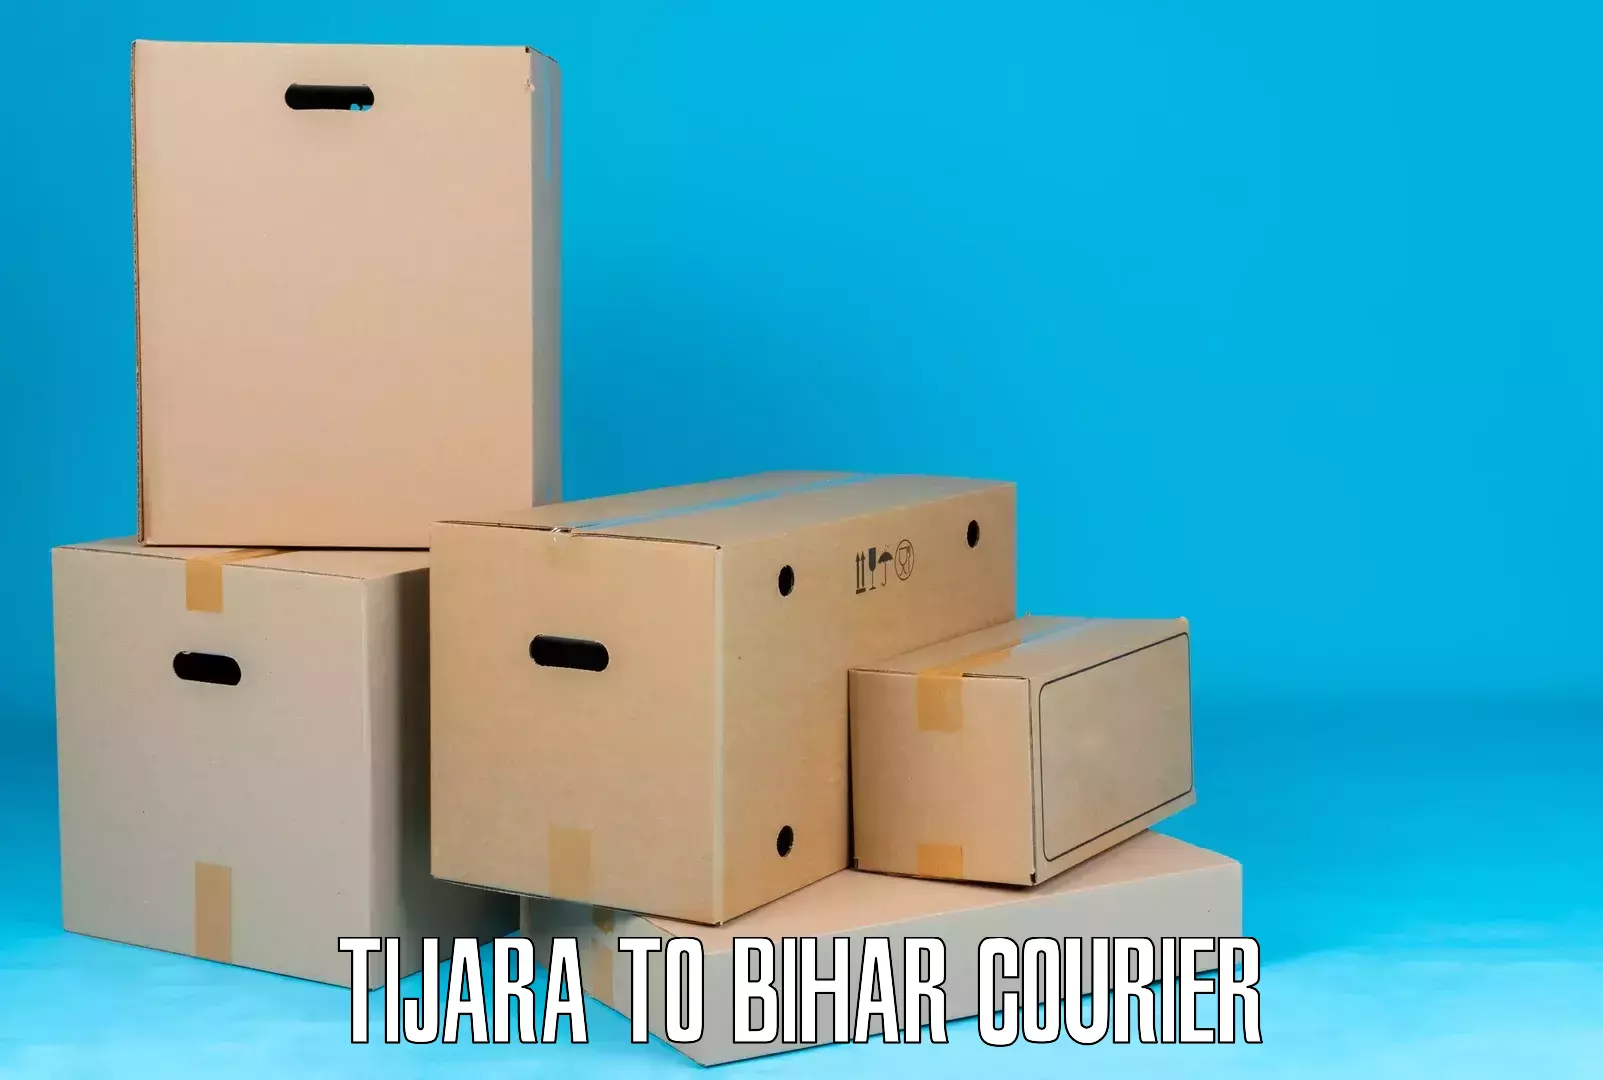 Multi-service courier options Tijara to Ghogha